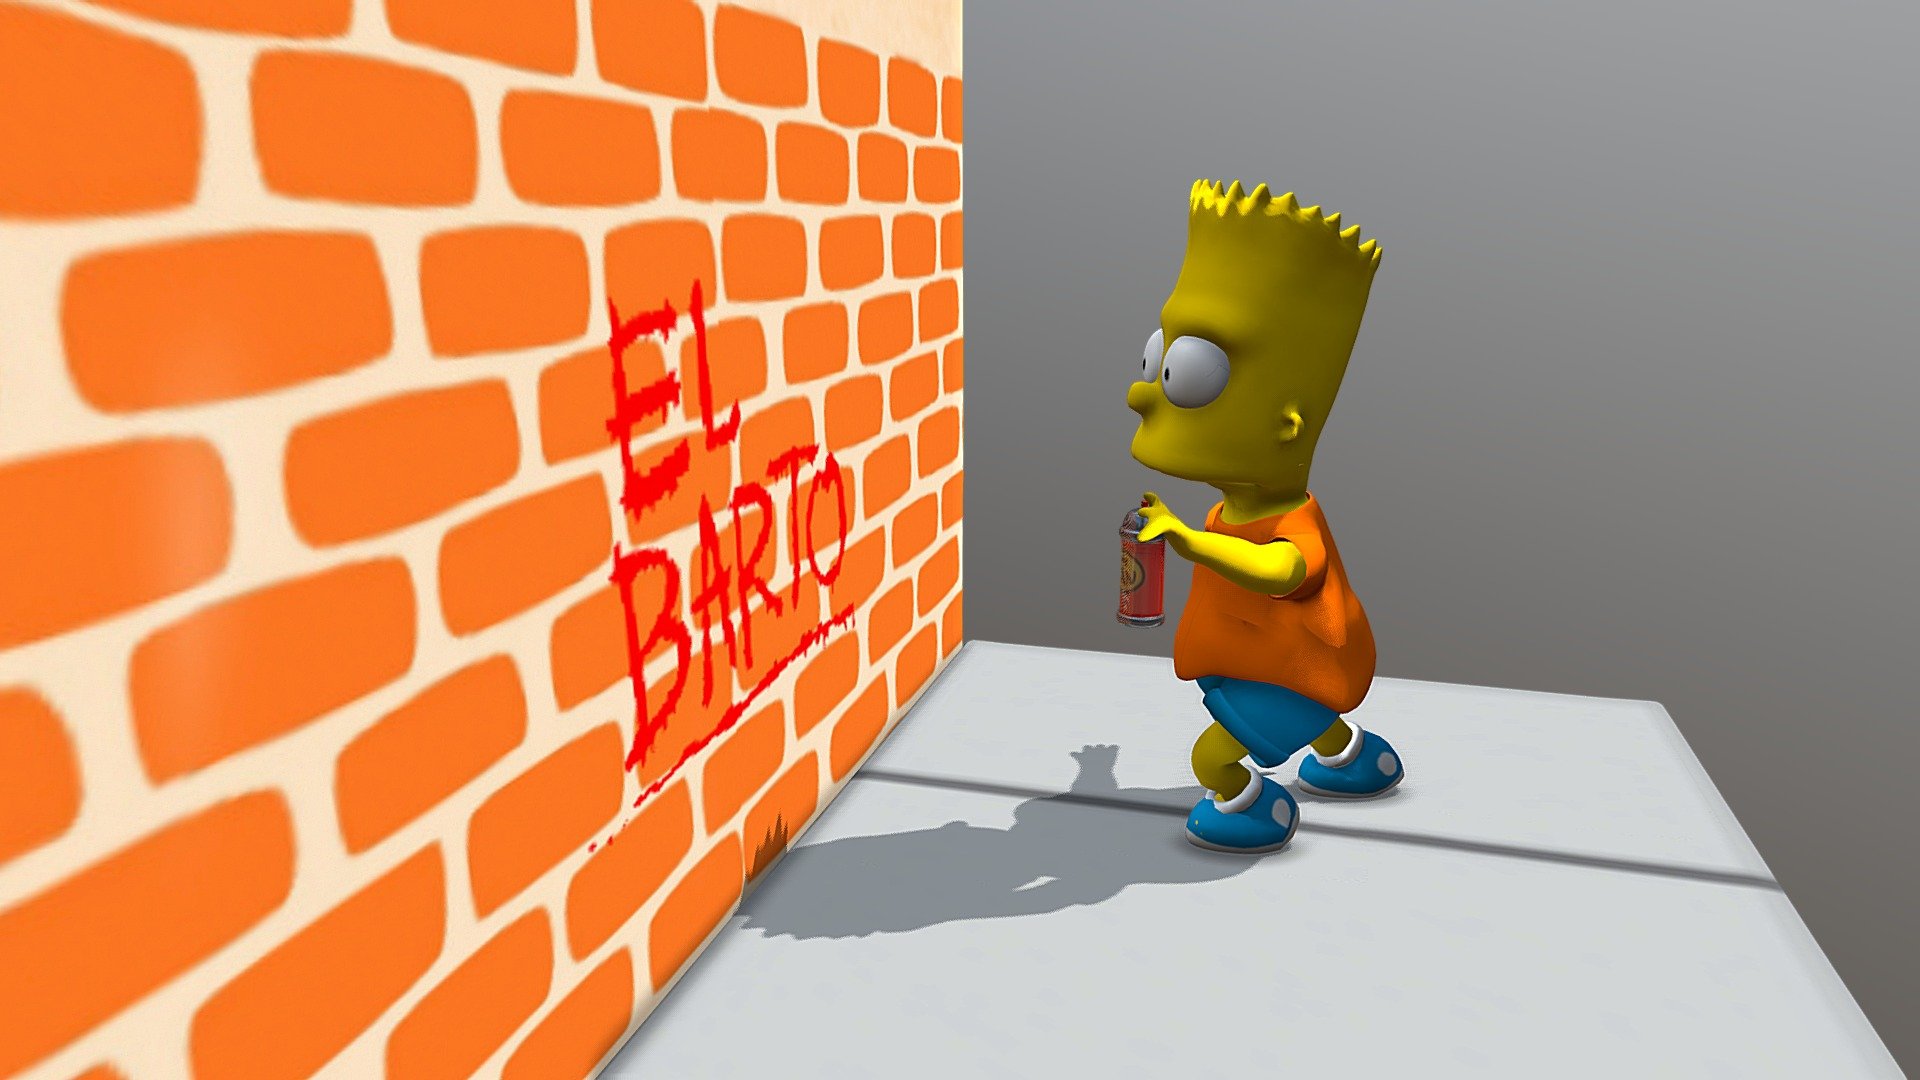 This fan made Bart Simpson graffiting the wall scene was sculpted in Zbrush, rigged and assembled in Maya 3d model